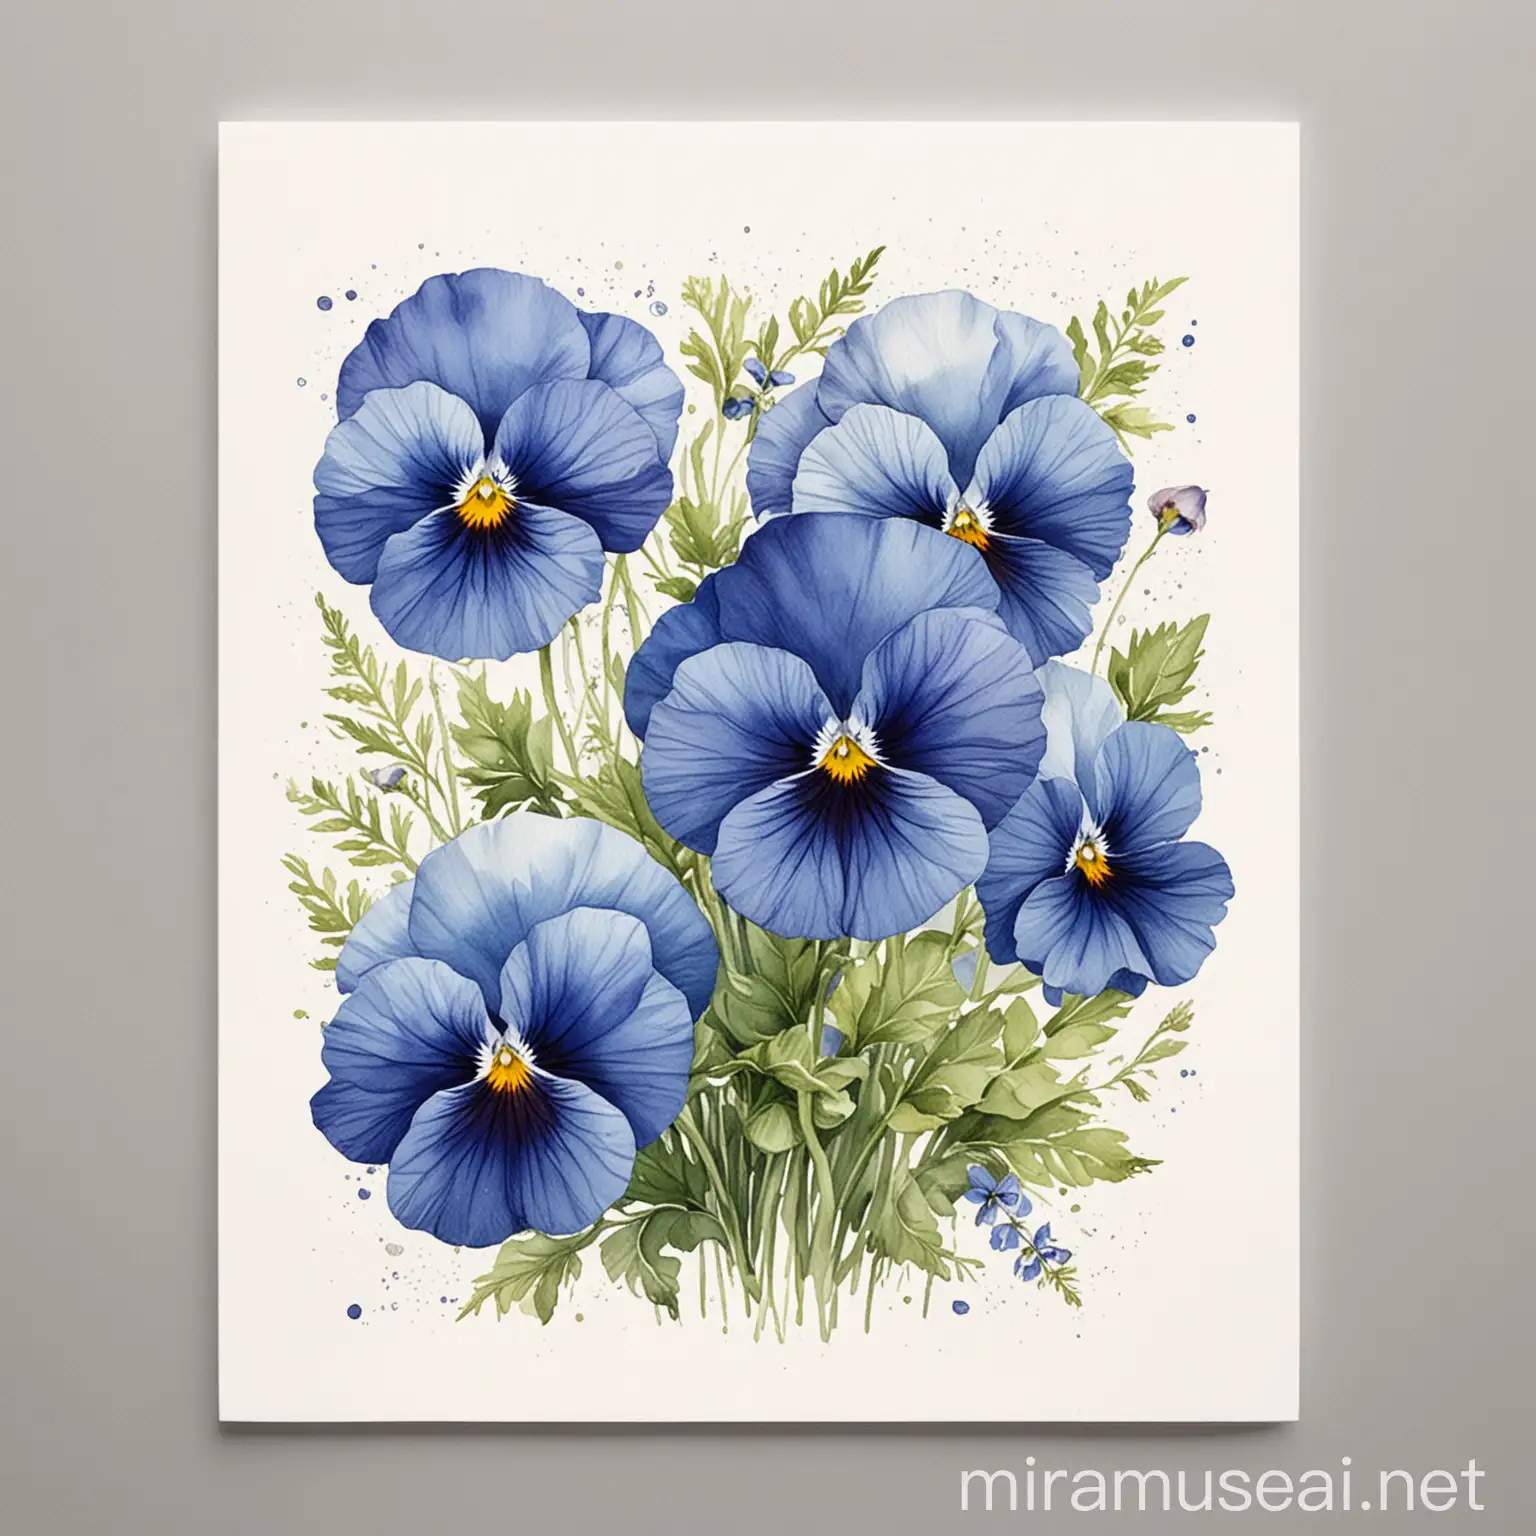 Blue Pansies Watercolor Illustration Delicate Floral Artwork on White Background